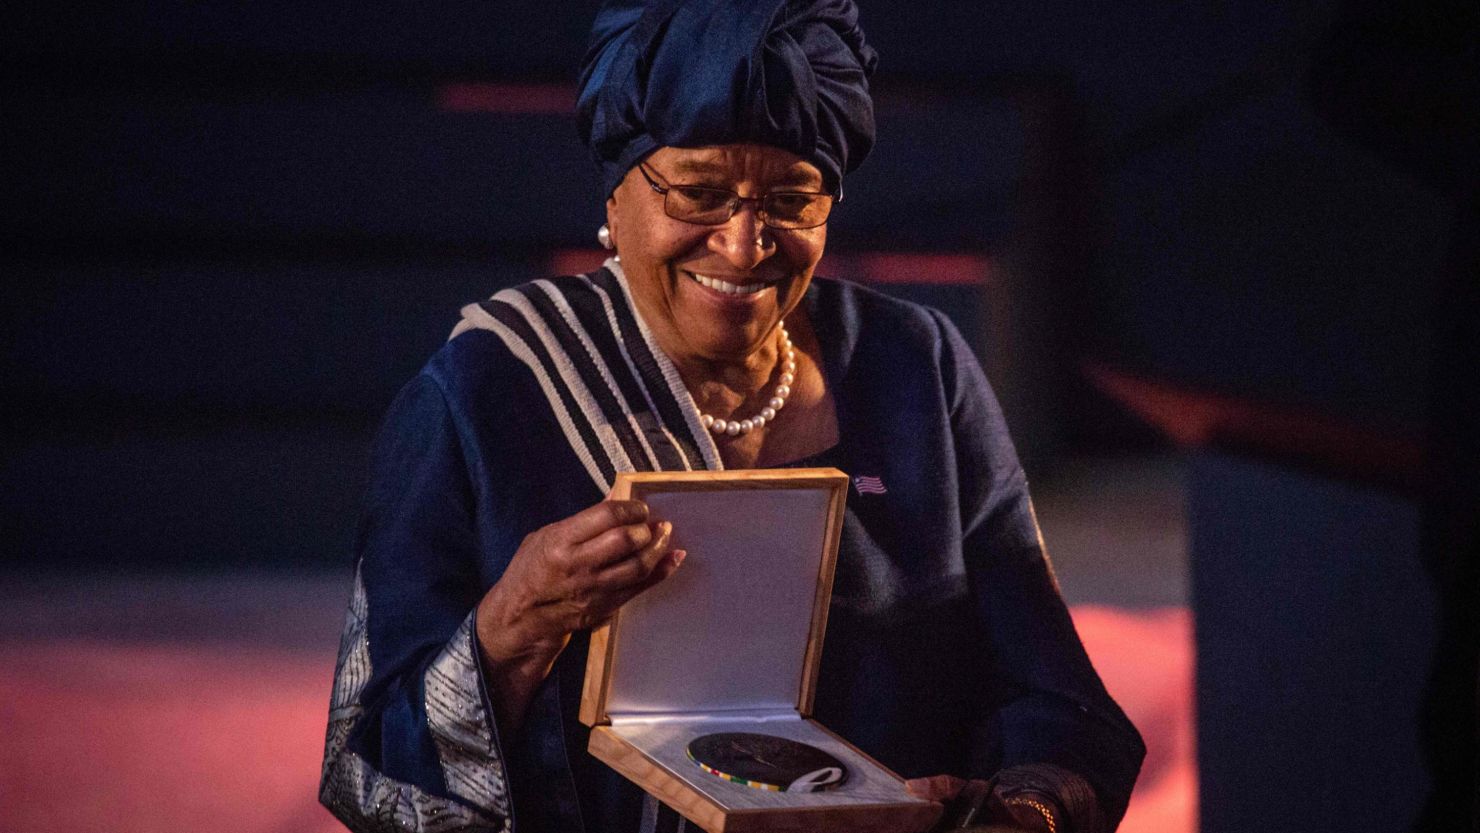 Ellen Johnson Sirleaf reacts Friday after receiving the Ibrahim Prize at the Kigali Convention Centre in Kigali, Rwanda.